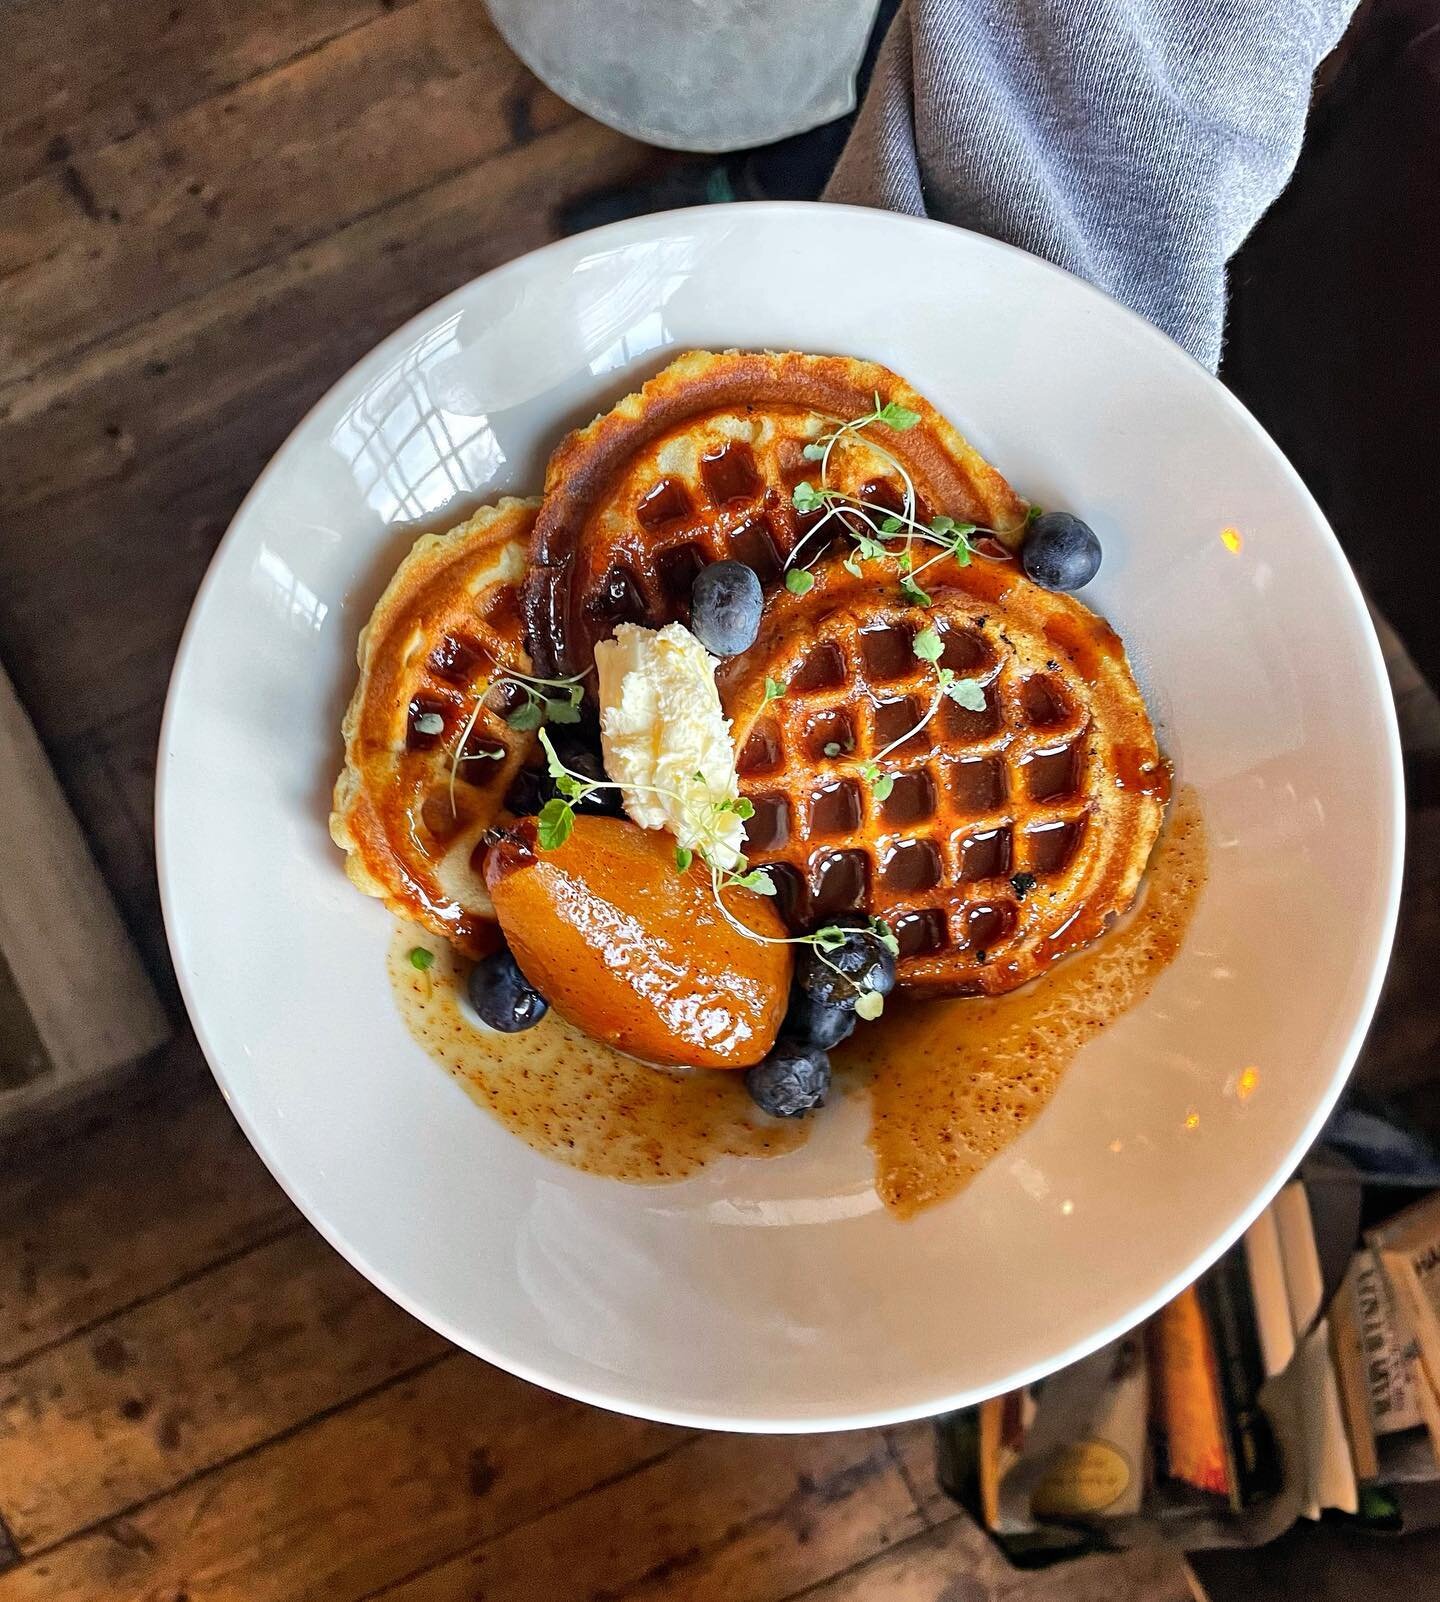 BlueSkies + BangingWaffles = a perfect weekend morning☀️
&bull;
We&rsquo;re open all weekend, come try our new menu💛
&bull;
We&rsquo;re open 10am-4pm
&bull;
#theorchardcoffeeandco #bristol #bristolfoodie #waffles #homemade #local #instagood #stgeorg